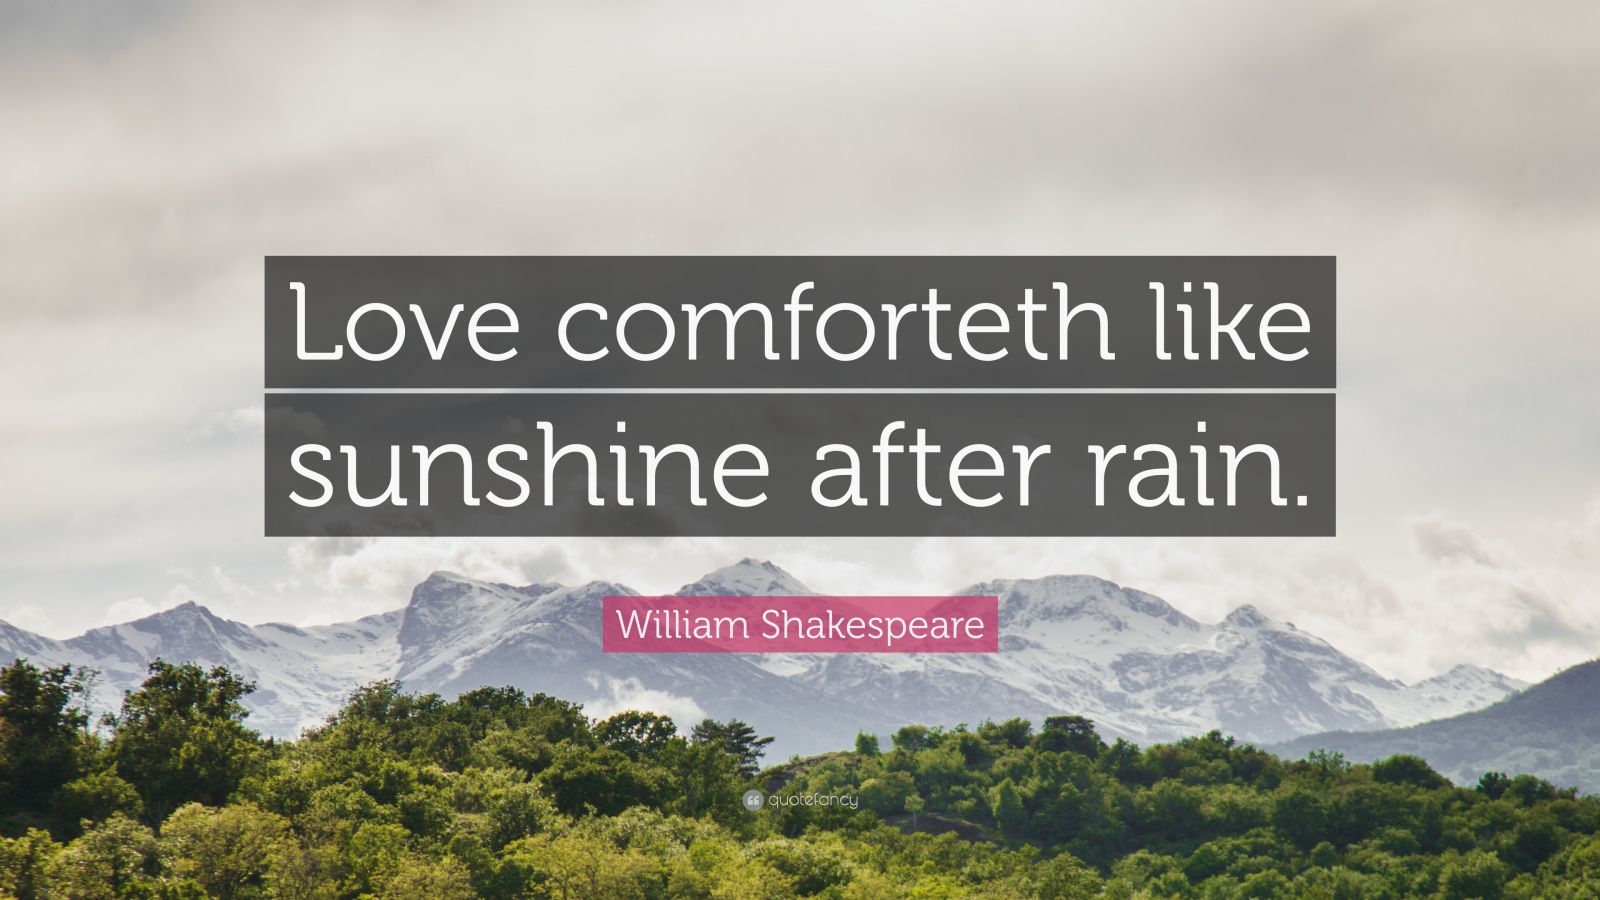 William Shakespeare Quotes About Love